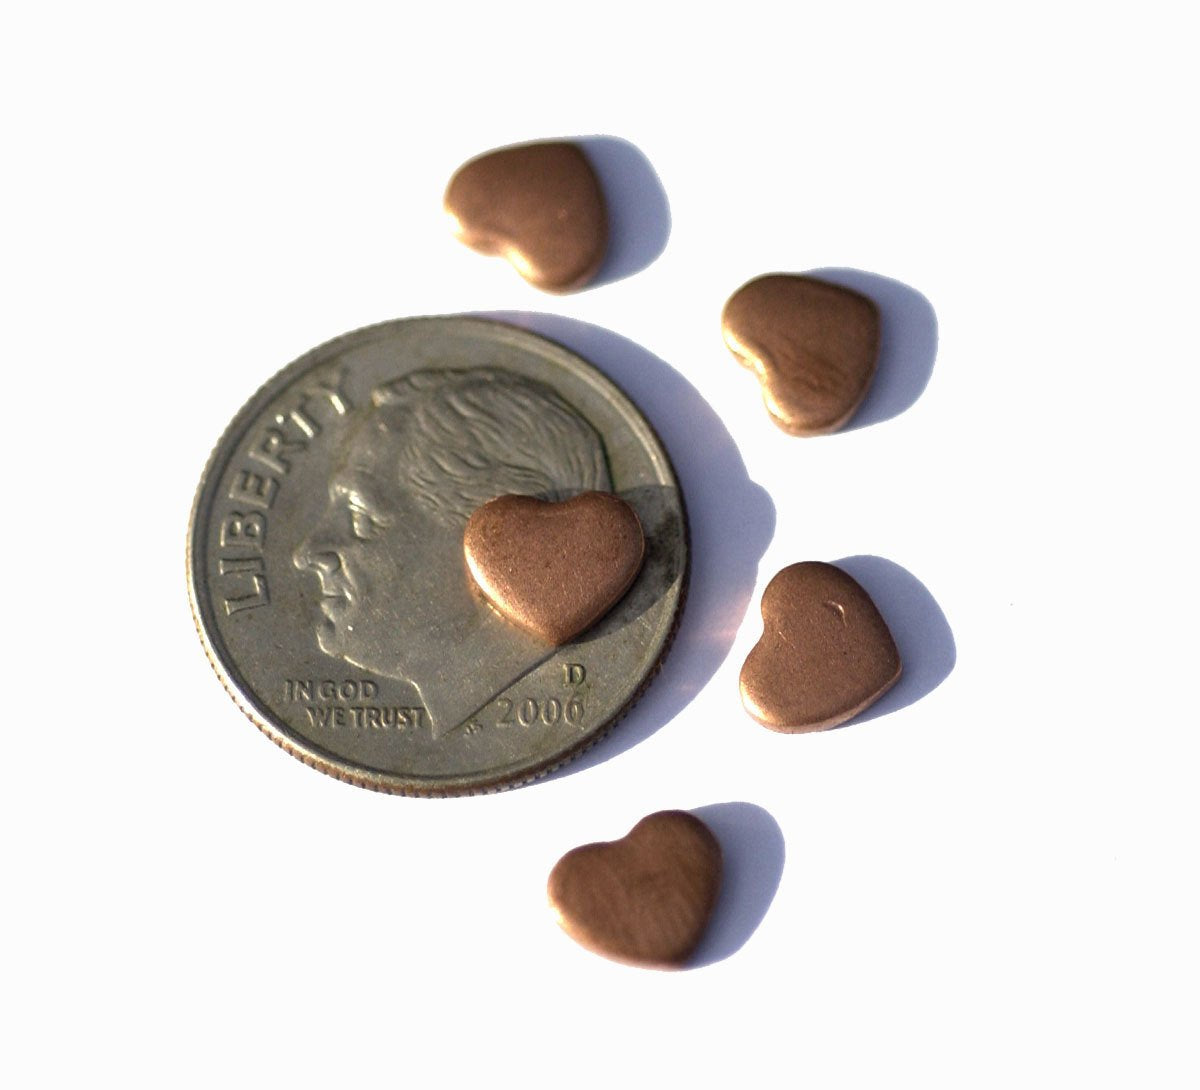 Copper Heart Classic 6mm x 5mm Heart Blanks Cutout for Enameling Stamping Texturing Variety of Metals